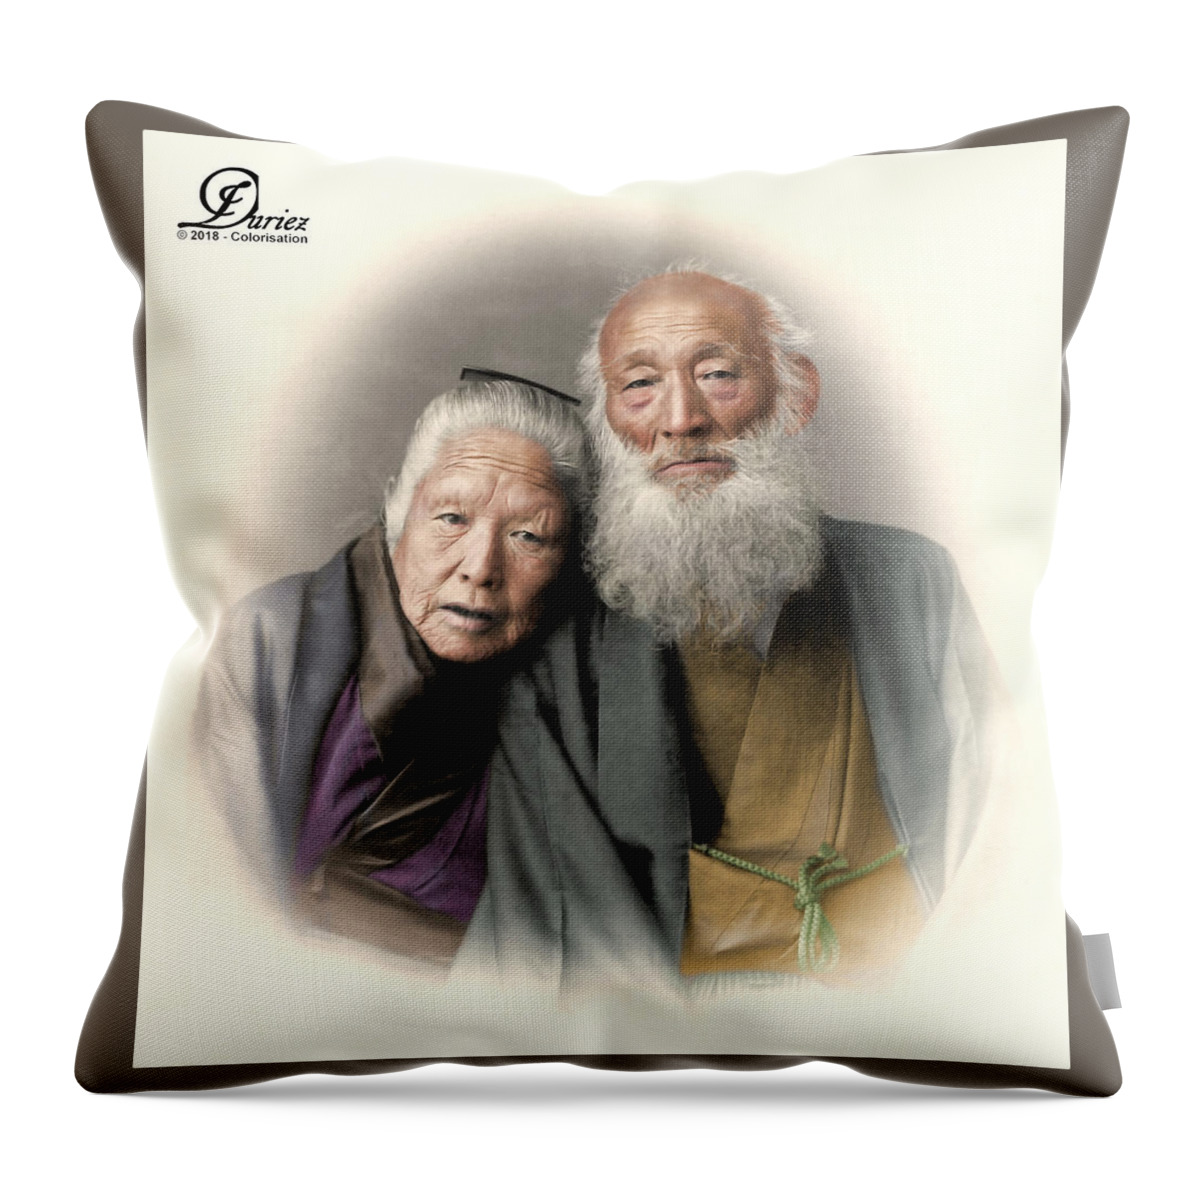 THE GEISHA'S GRANDPARENTS -- A Loving Japanese Couple in Old Age